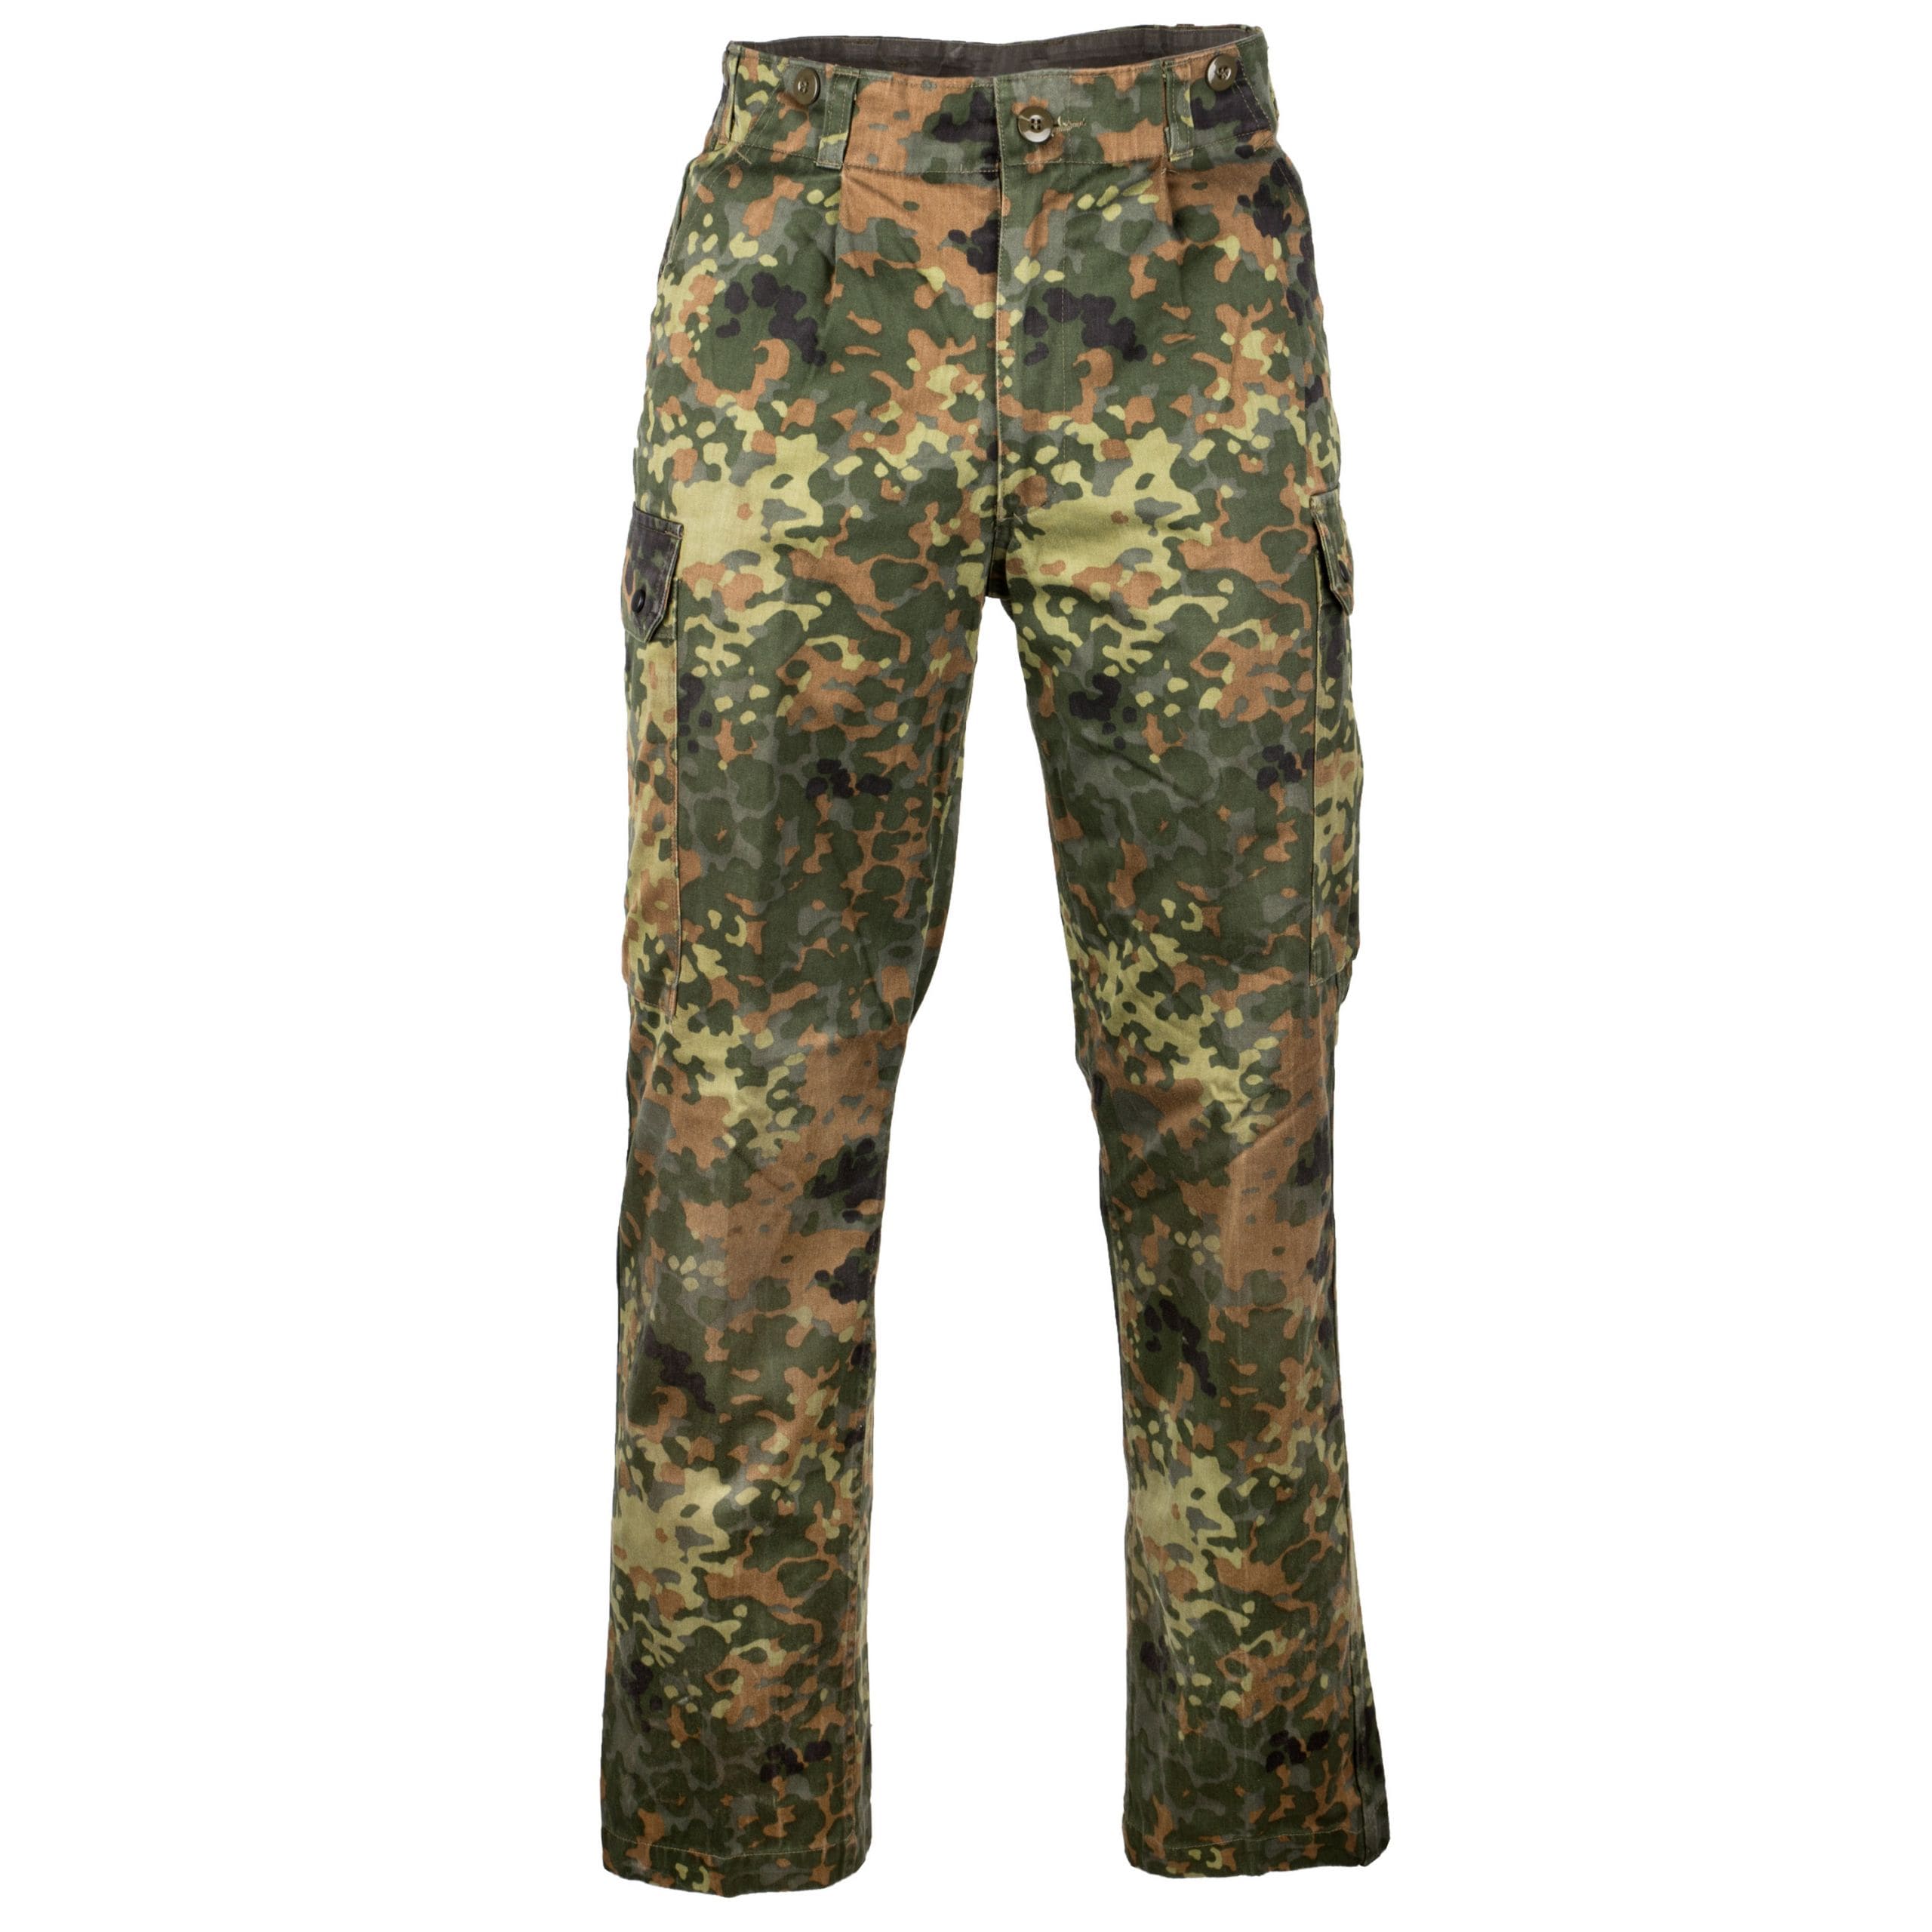 tailles BW treillis camouflage d/'occasion diff